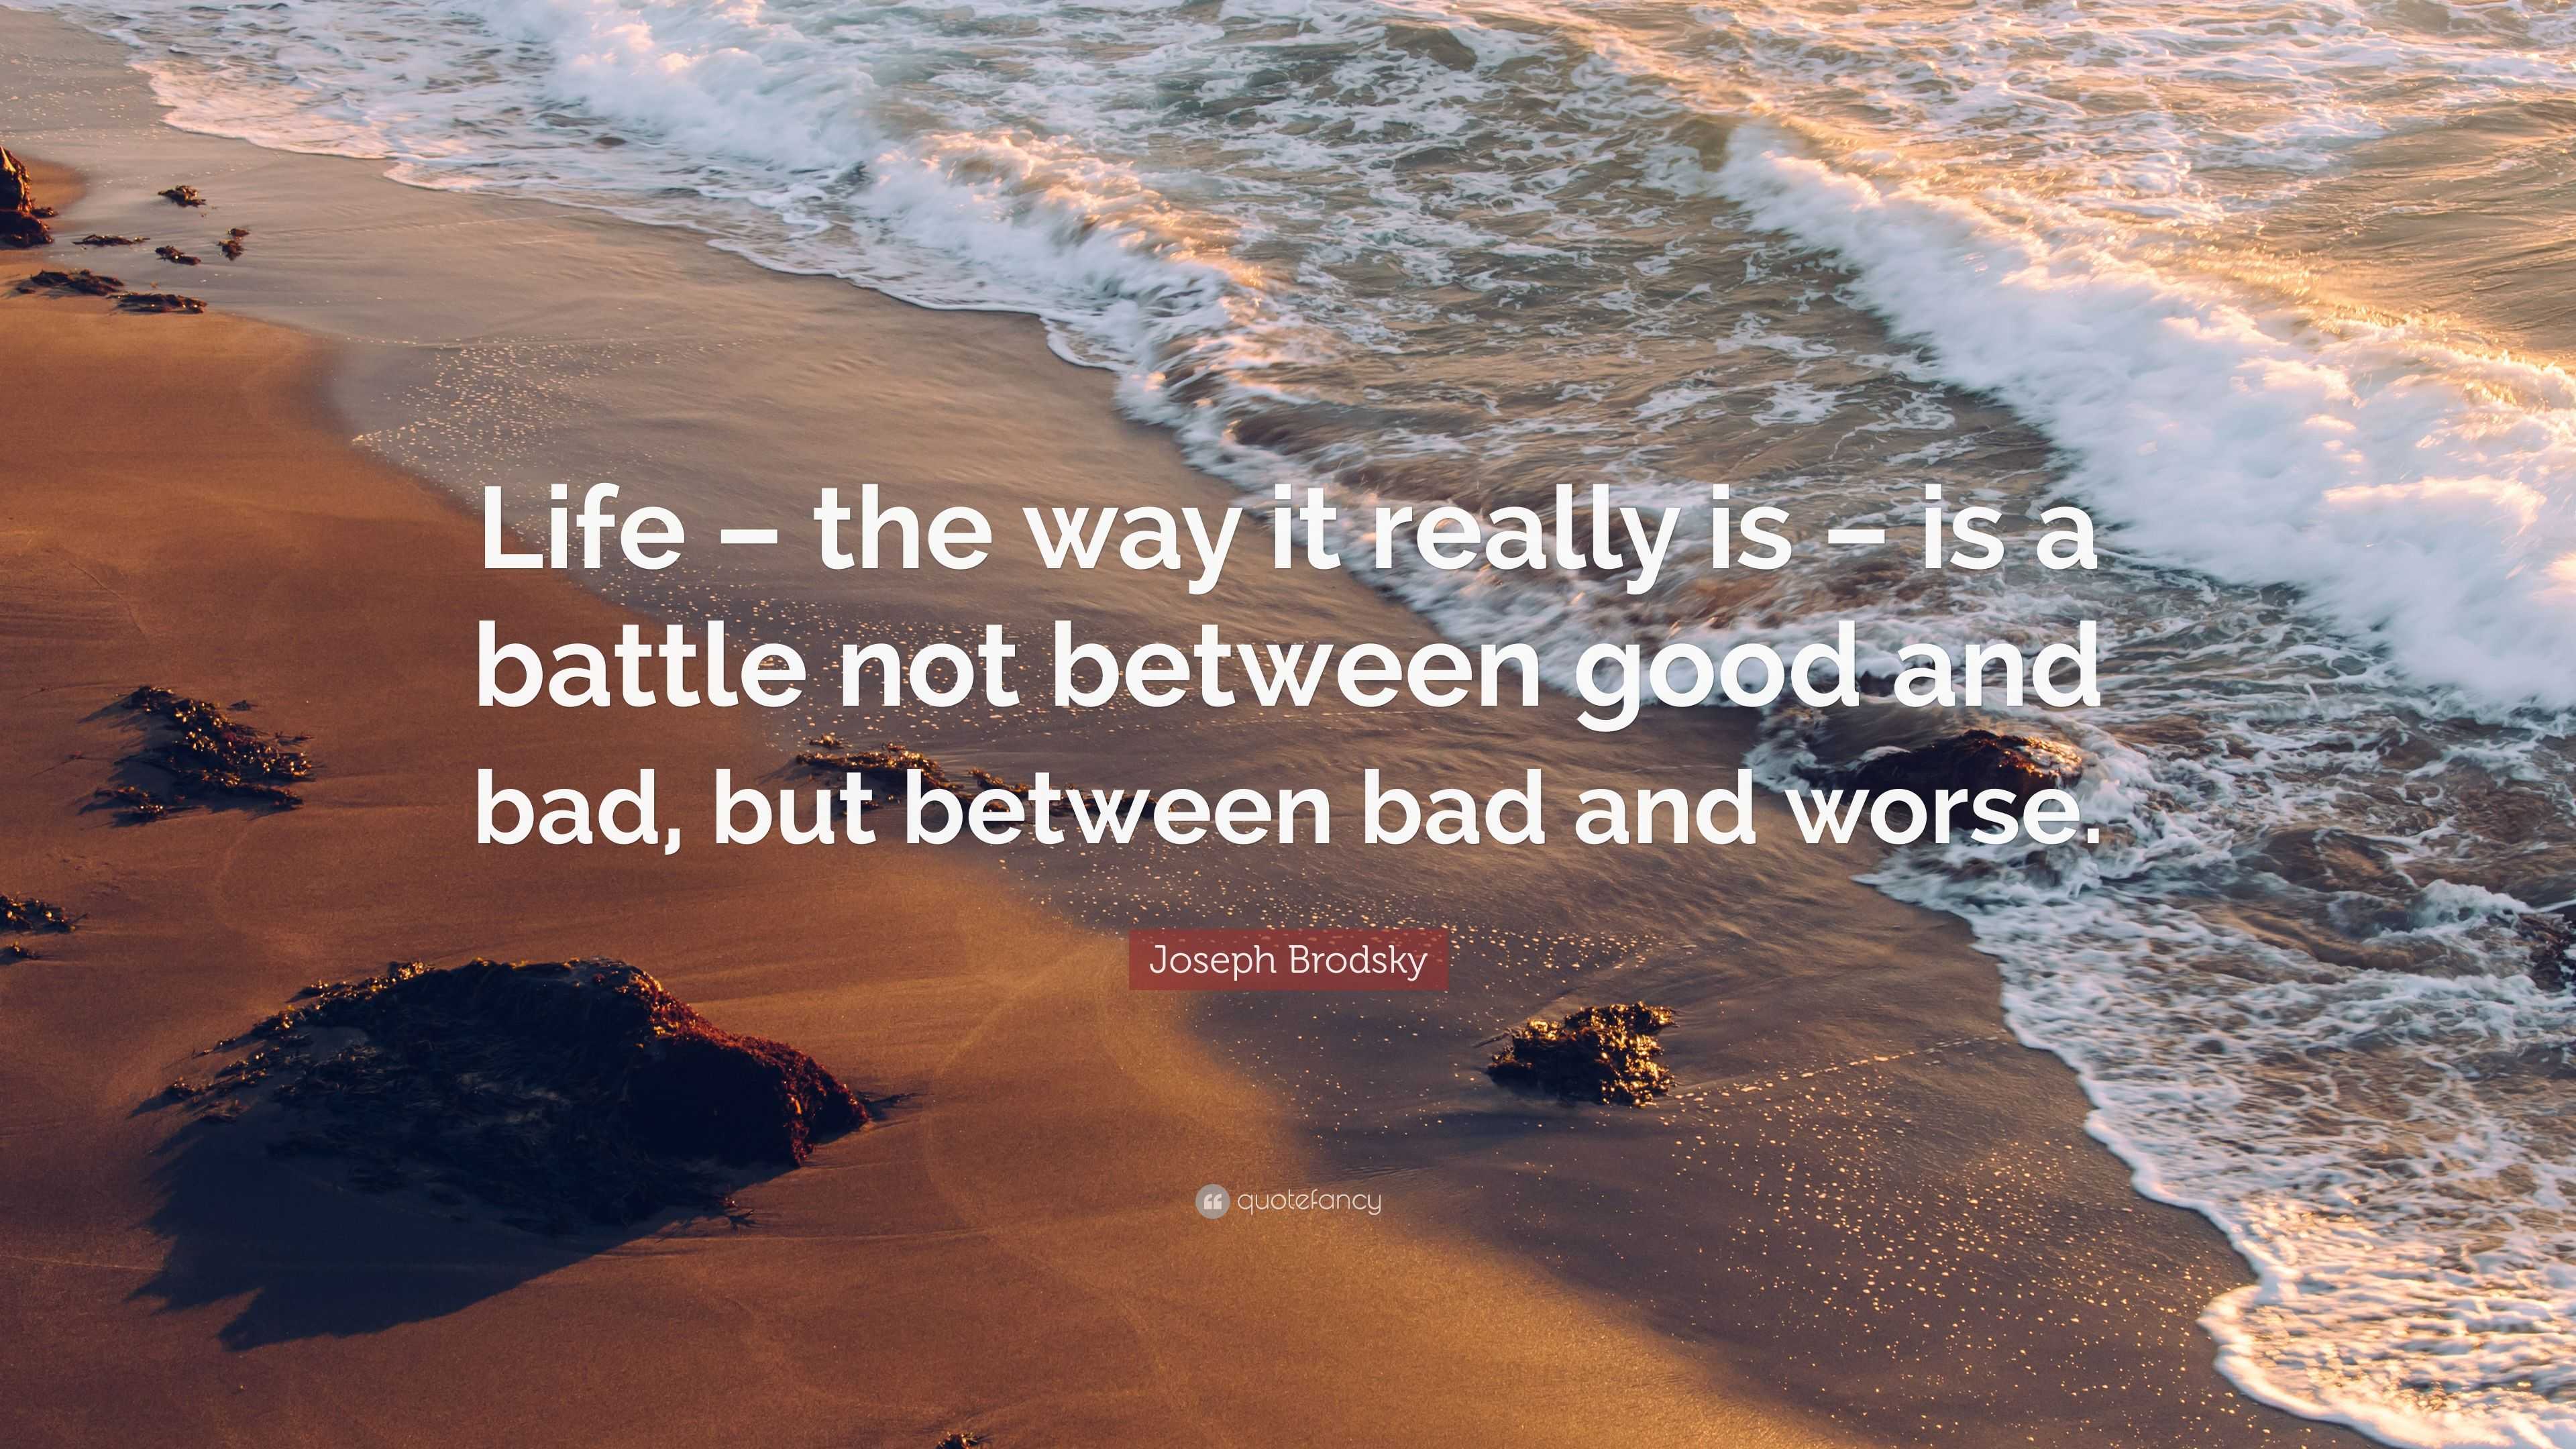 Joseph Brodsky Quote: “Life – the way it really is – is a battle not ...